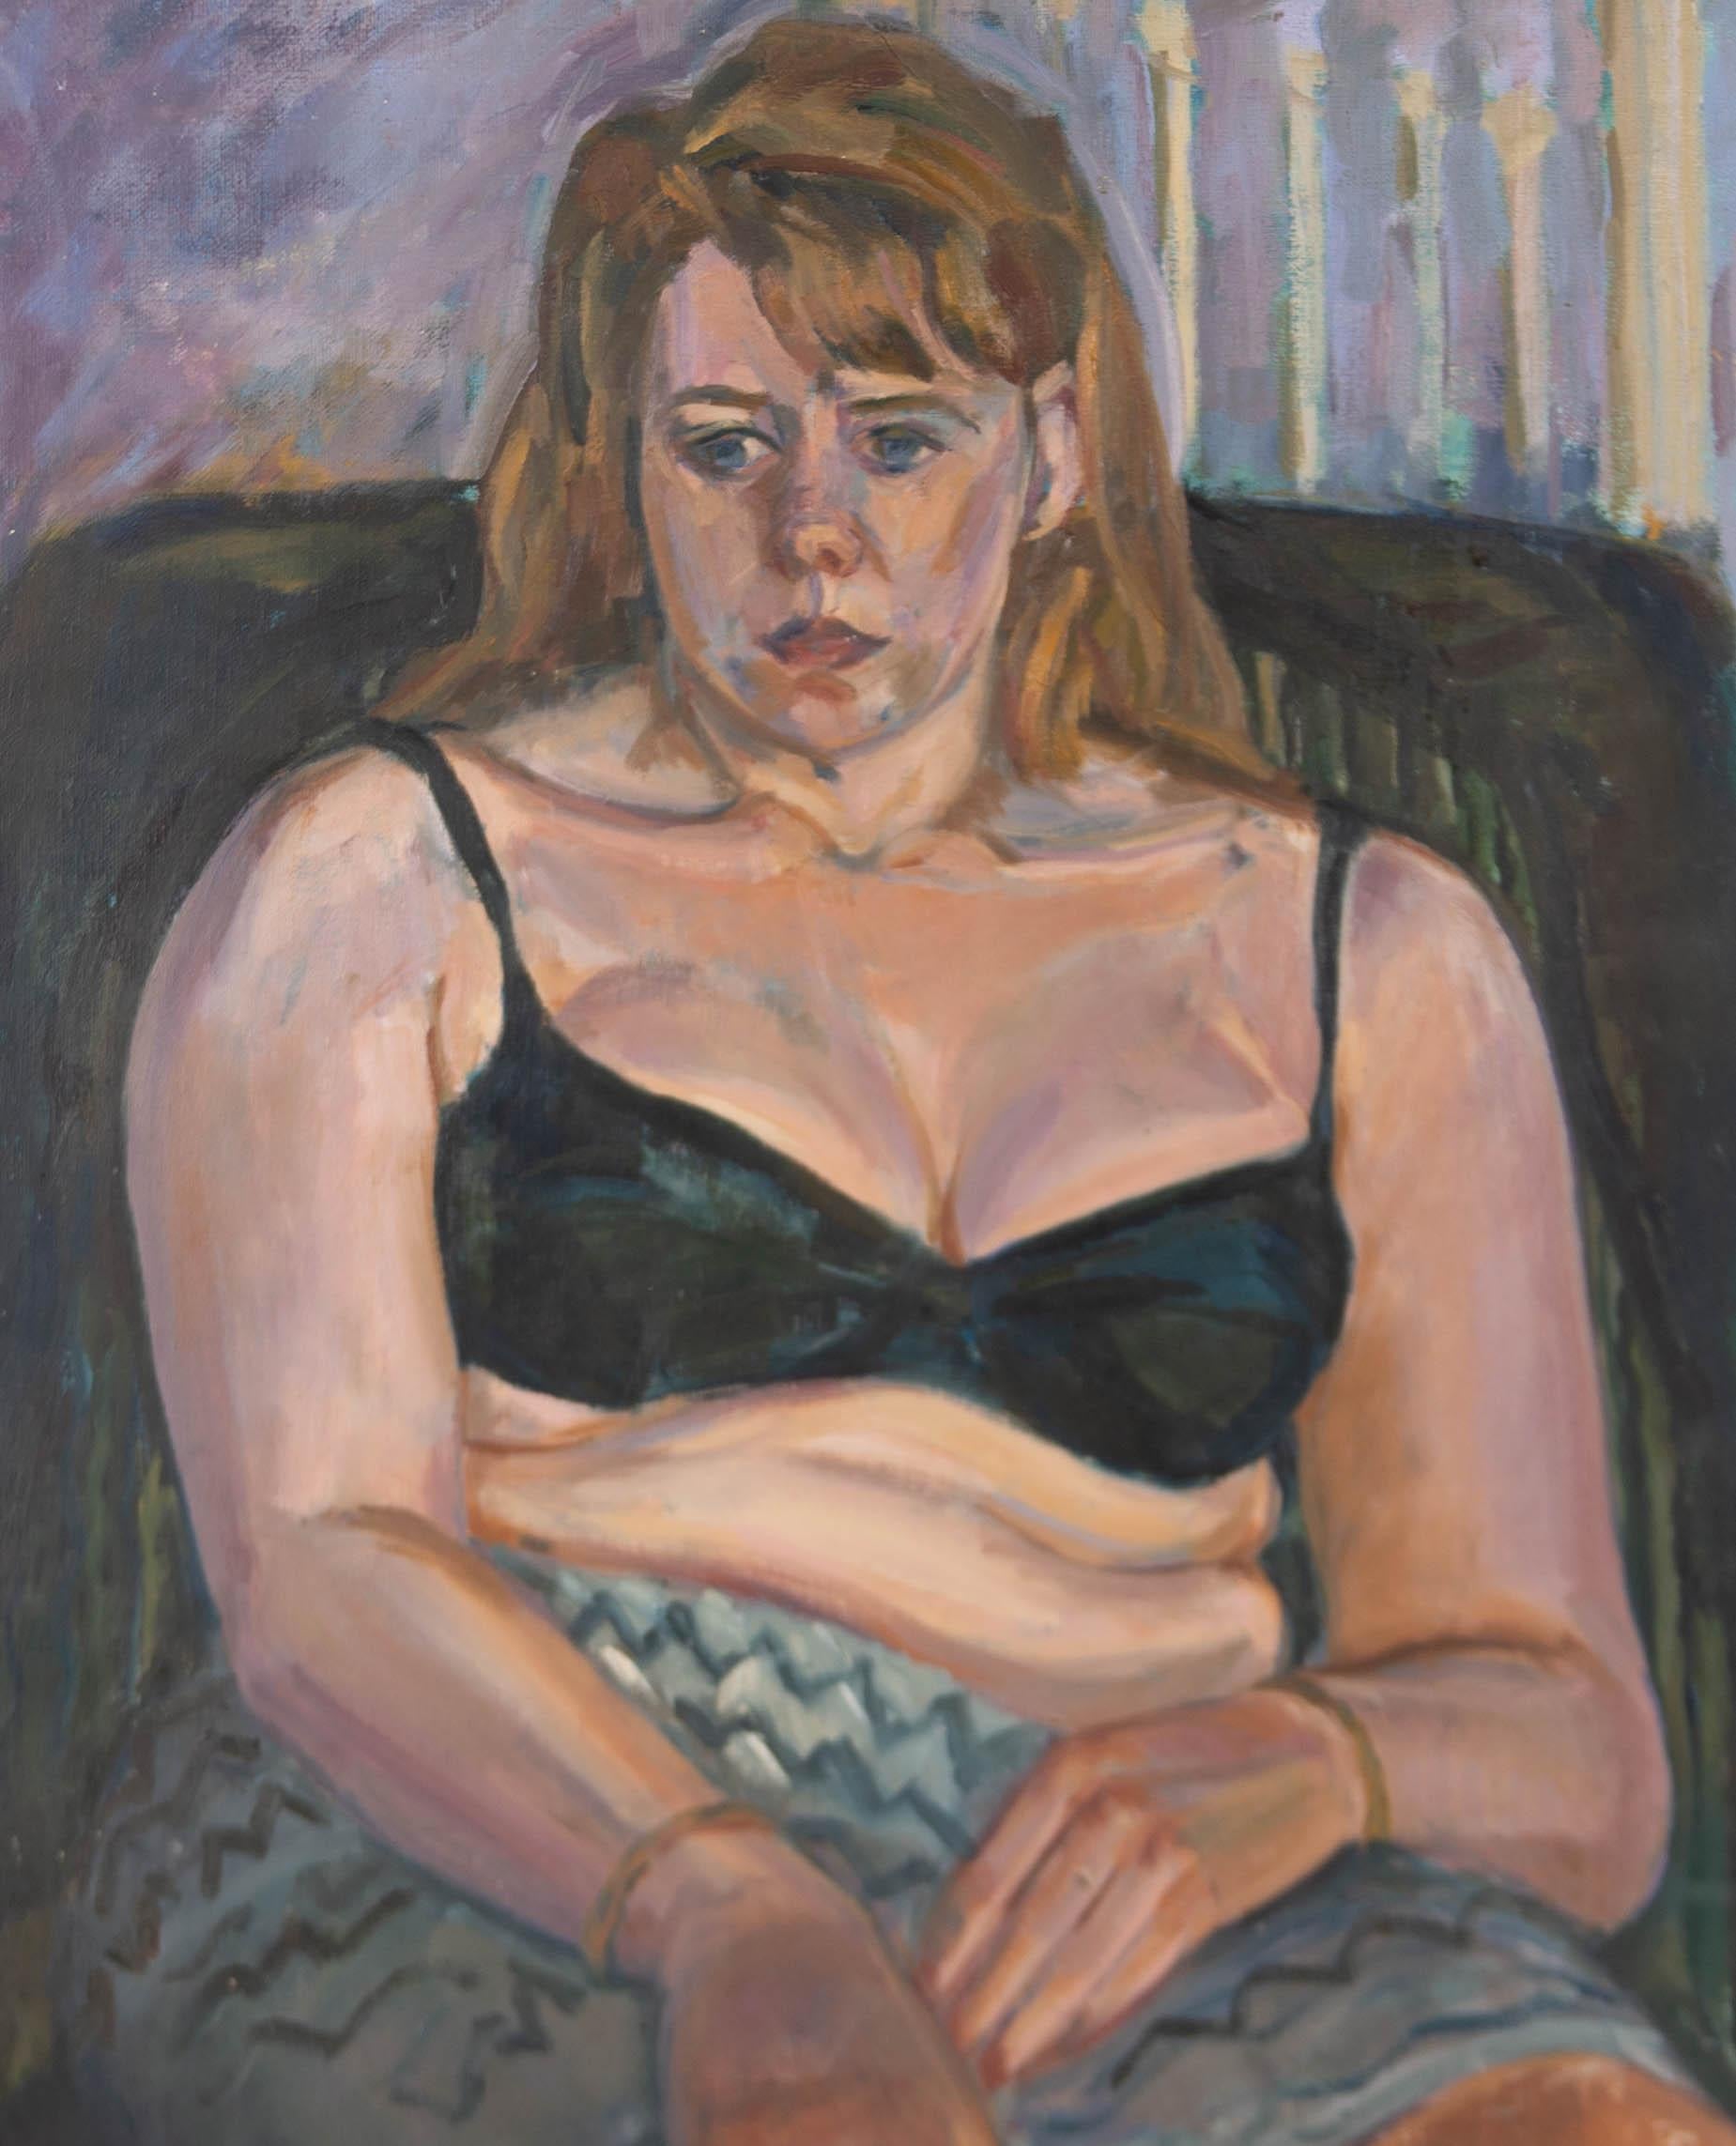 A fine and expressive oil painting by the British artist Susan Paine. Here, in thick and intense brush strokes, Paine depicts a female figure in her undergarments, gazing towards the ground. The artist's name is inscribed to the canvas on the